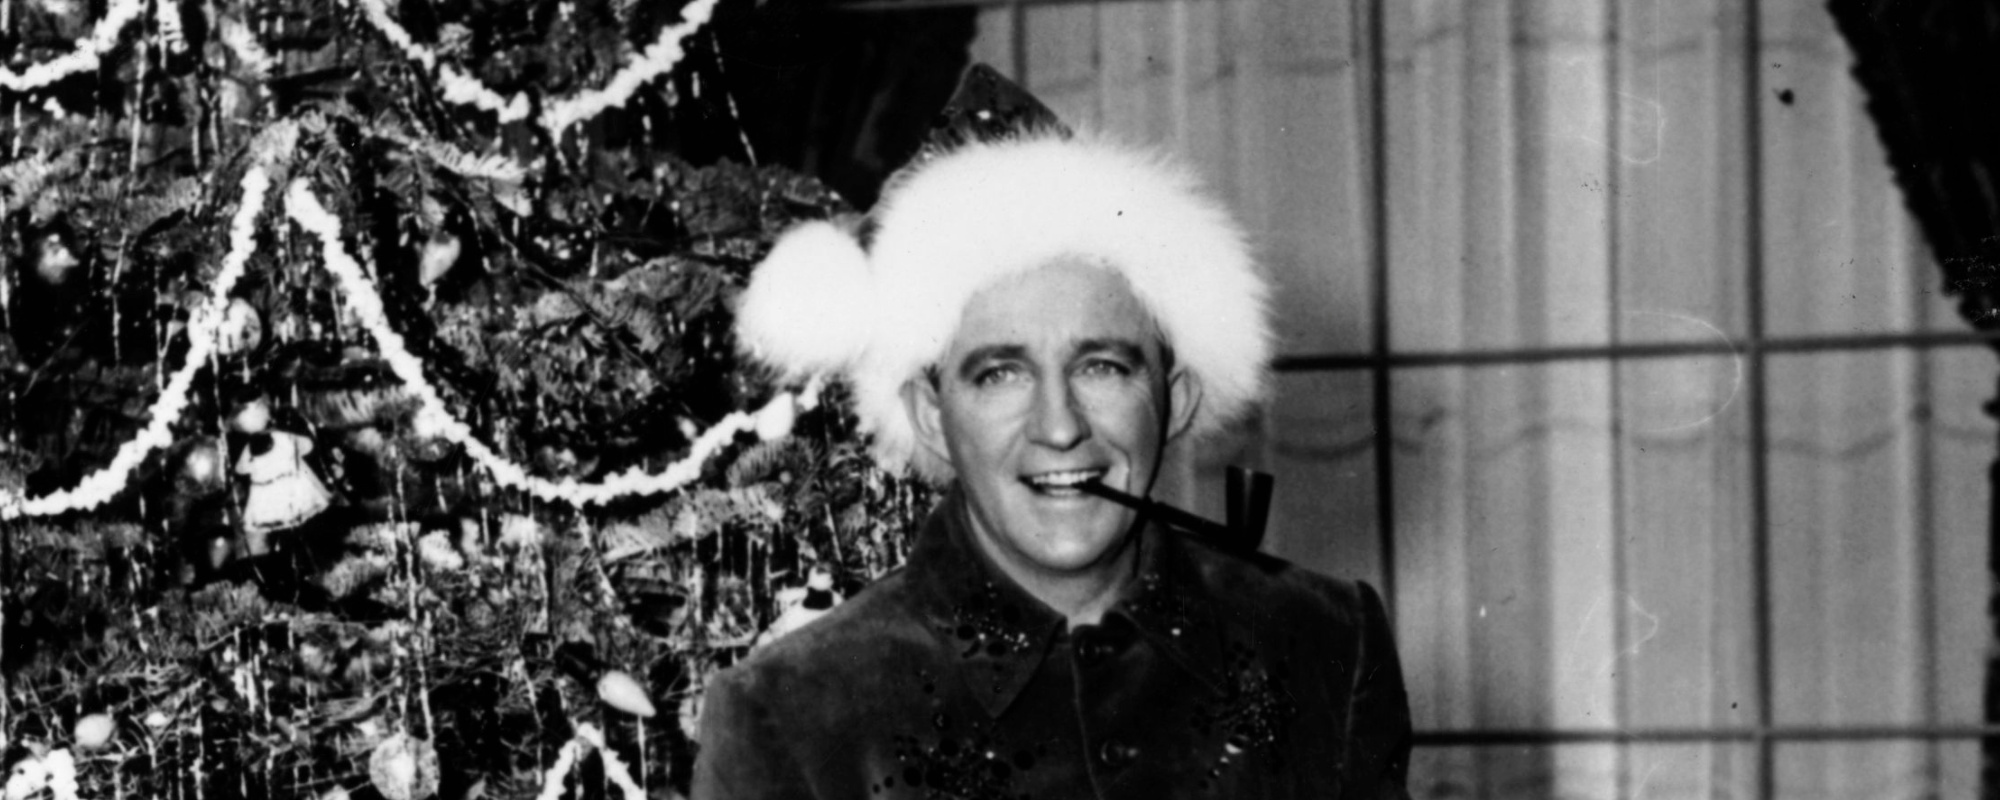 The 4 Best Renditions of “White Christmas” from Otis Redding, Lady Gaga, and More